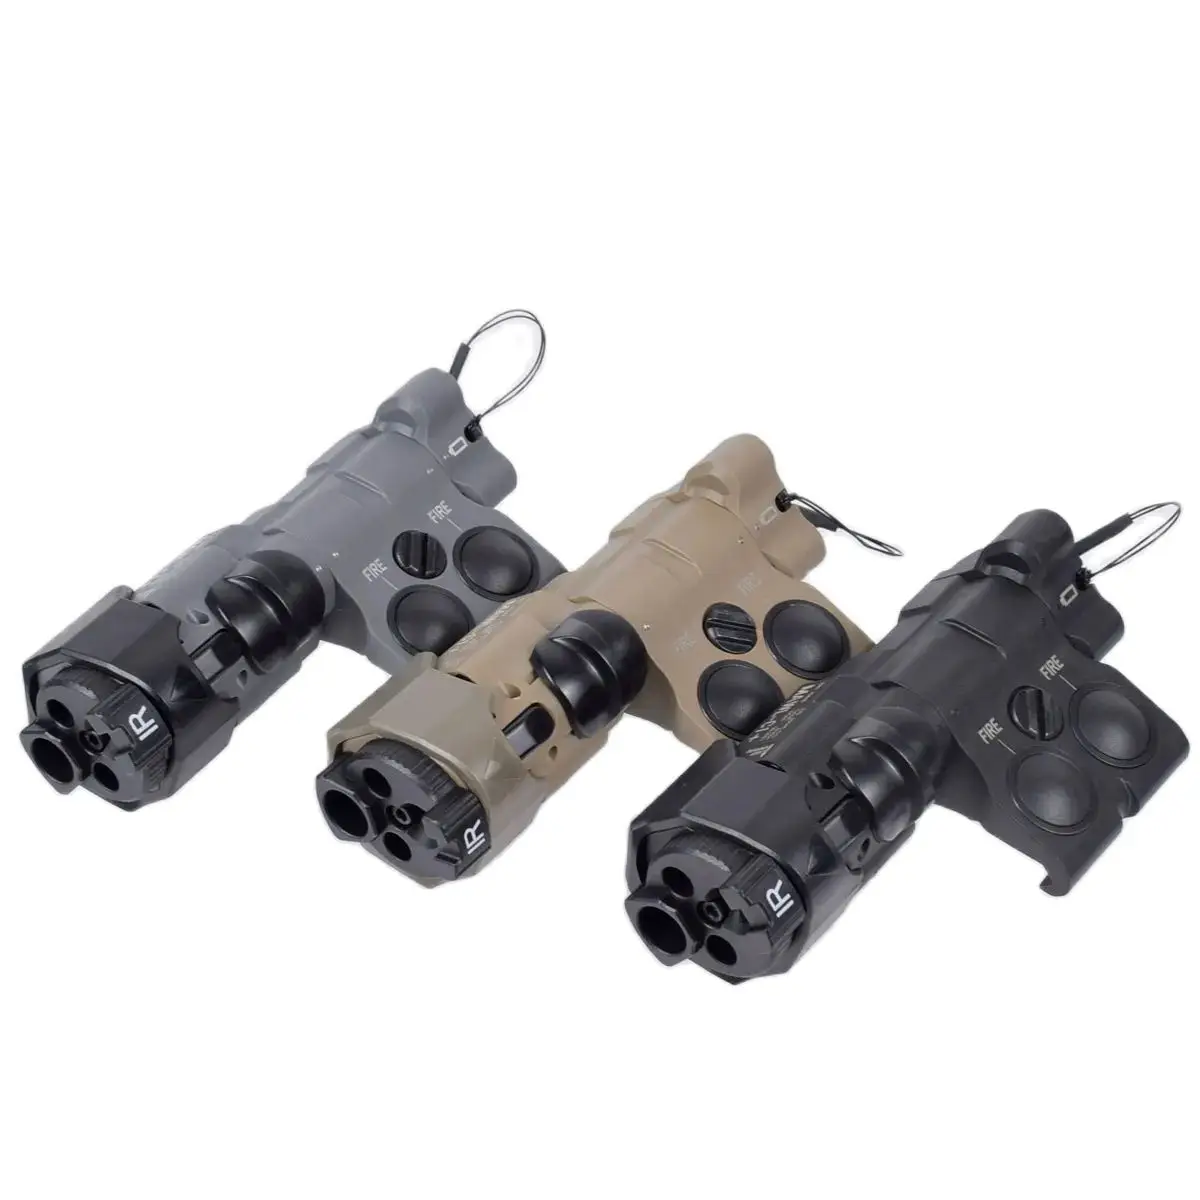 

MAWL-C1 Tactical Laser Airsoft Metal CNC Upgraded LED Aiming MAWL Red Green Blue Hunting Weapon Lights IR Illumination